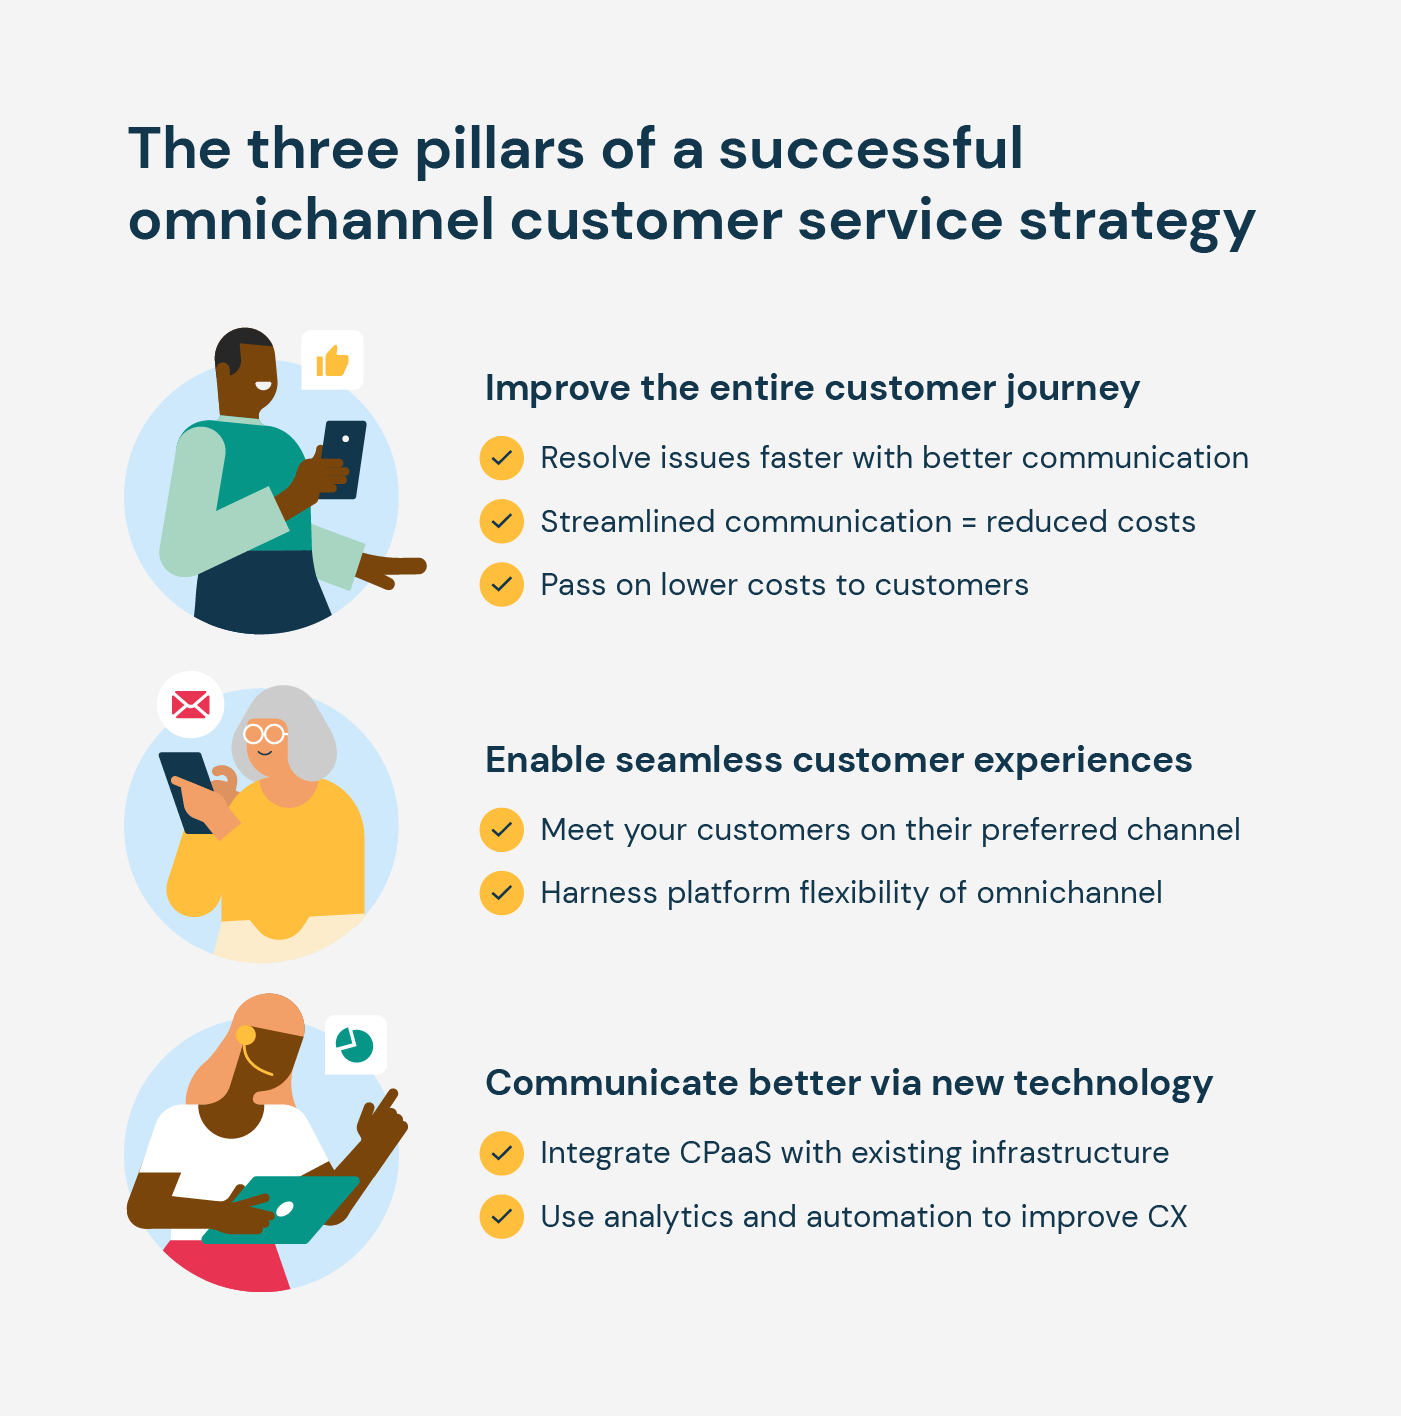 Illustration show the three most important ways to implement an omnichannel customer service strategy